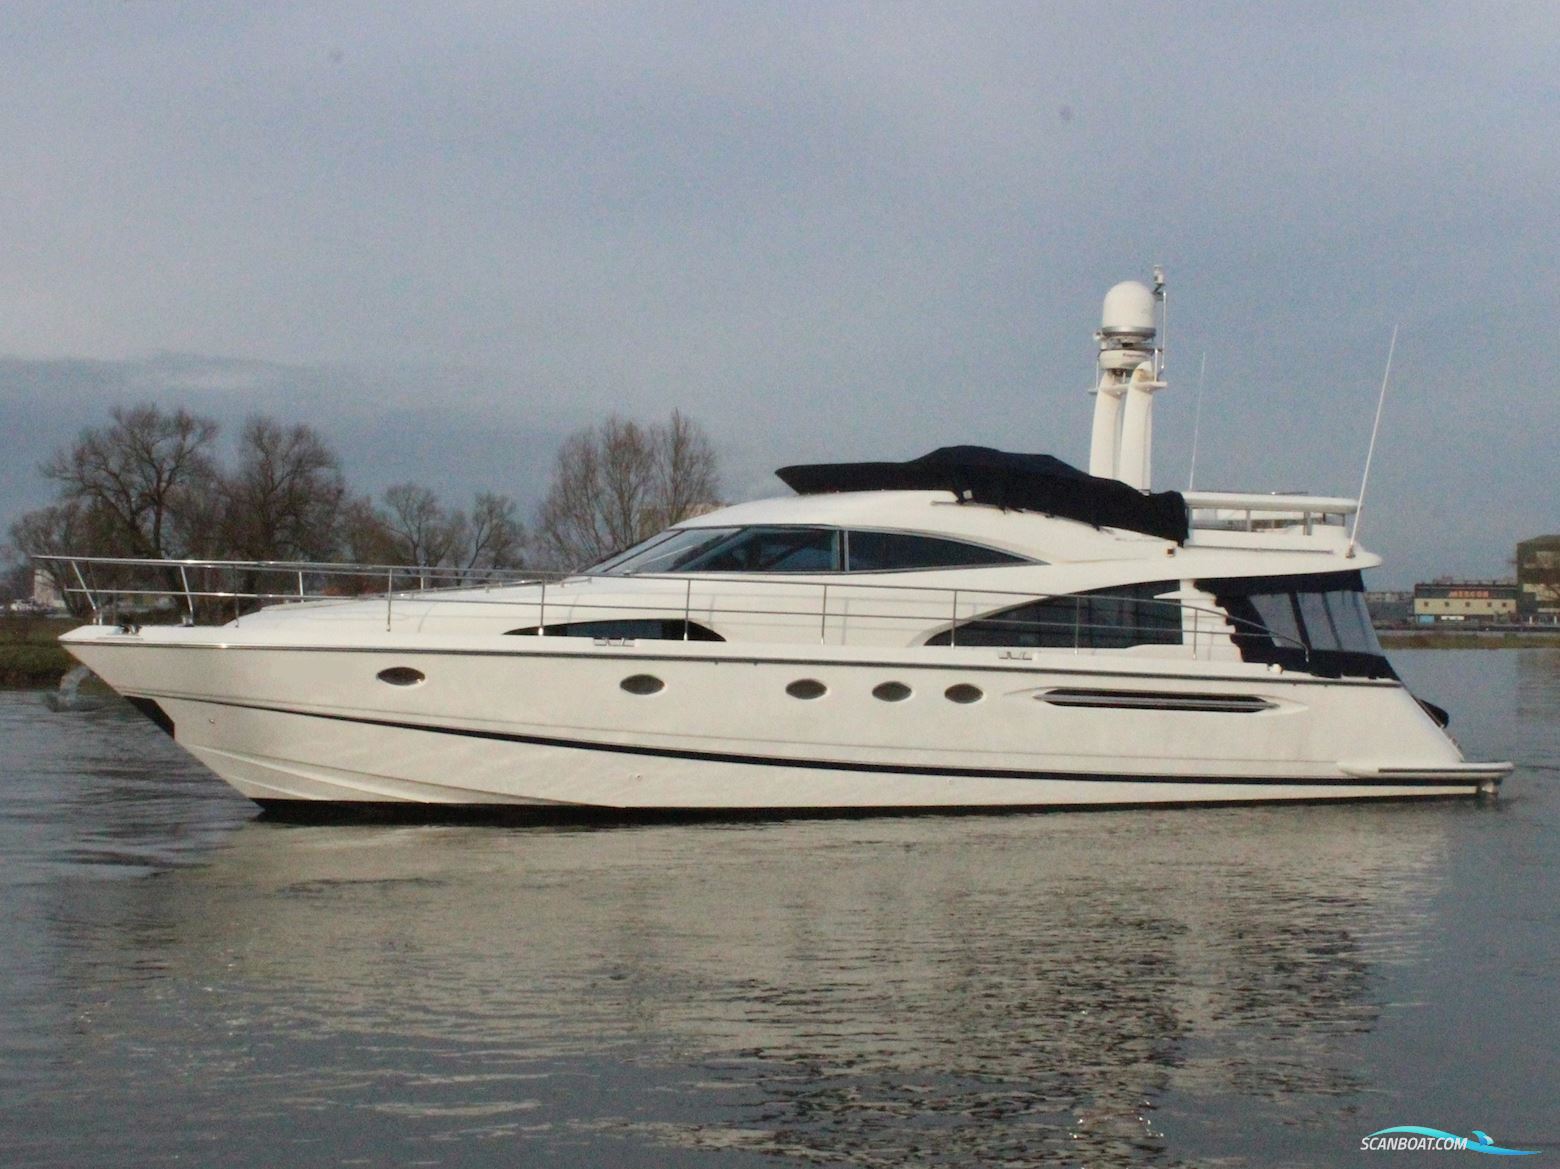 Fairline Squadron 58 Motor boat 2003, with Volvo Penta engine, The Netherlands